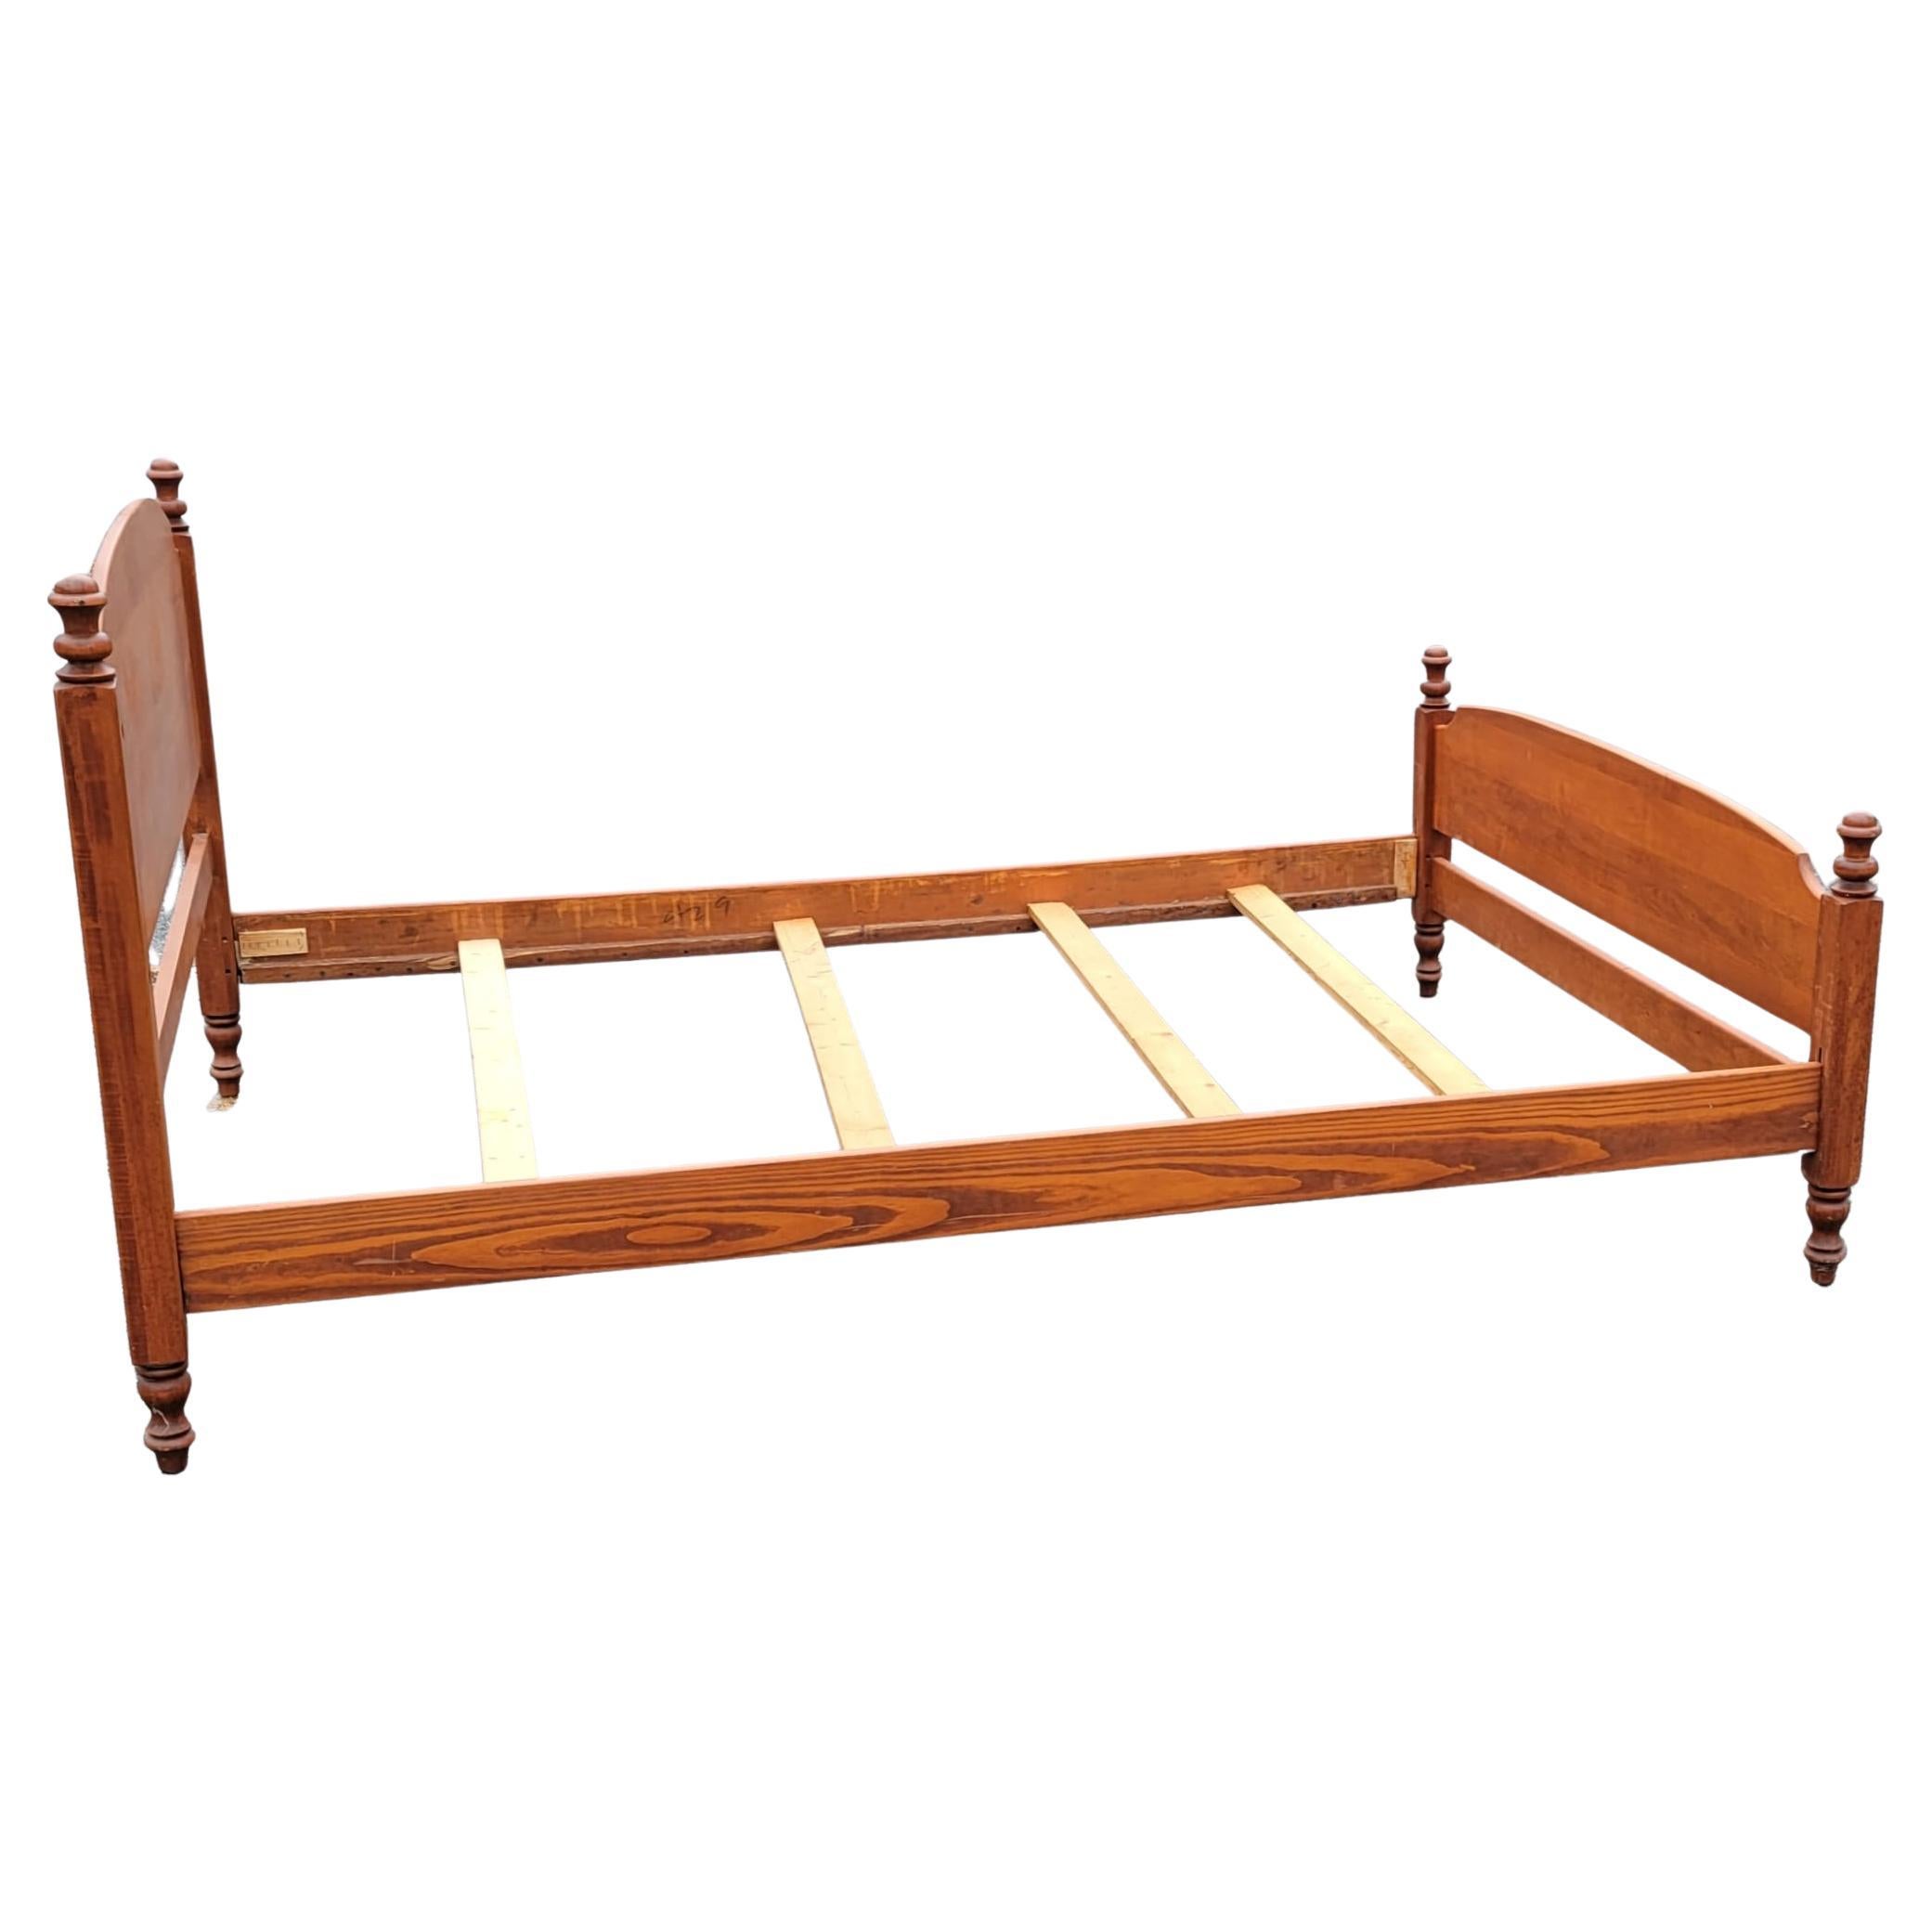 Hand-Crafted American Classical Colonial Style Maple Full Size Bedstead